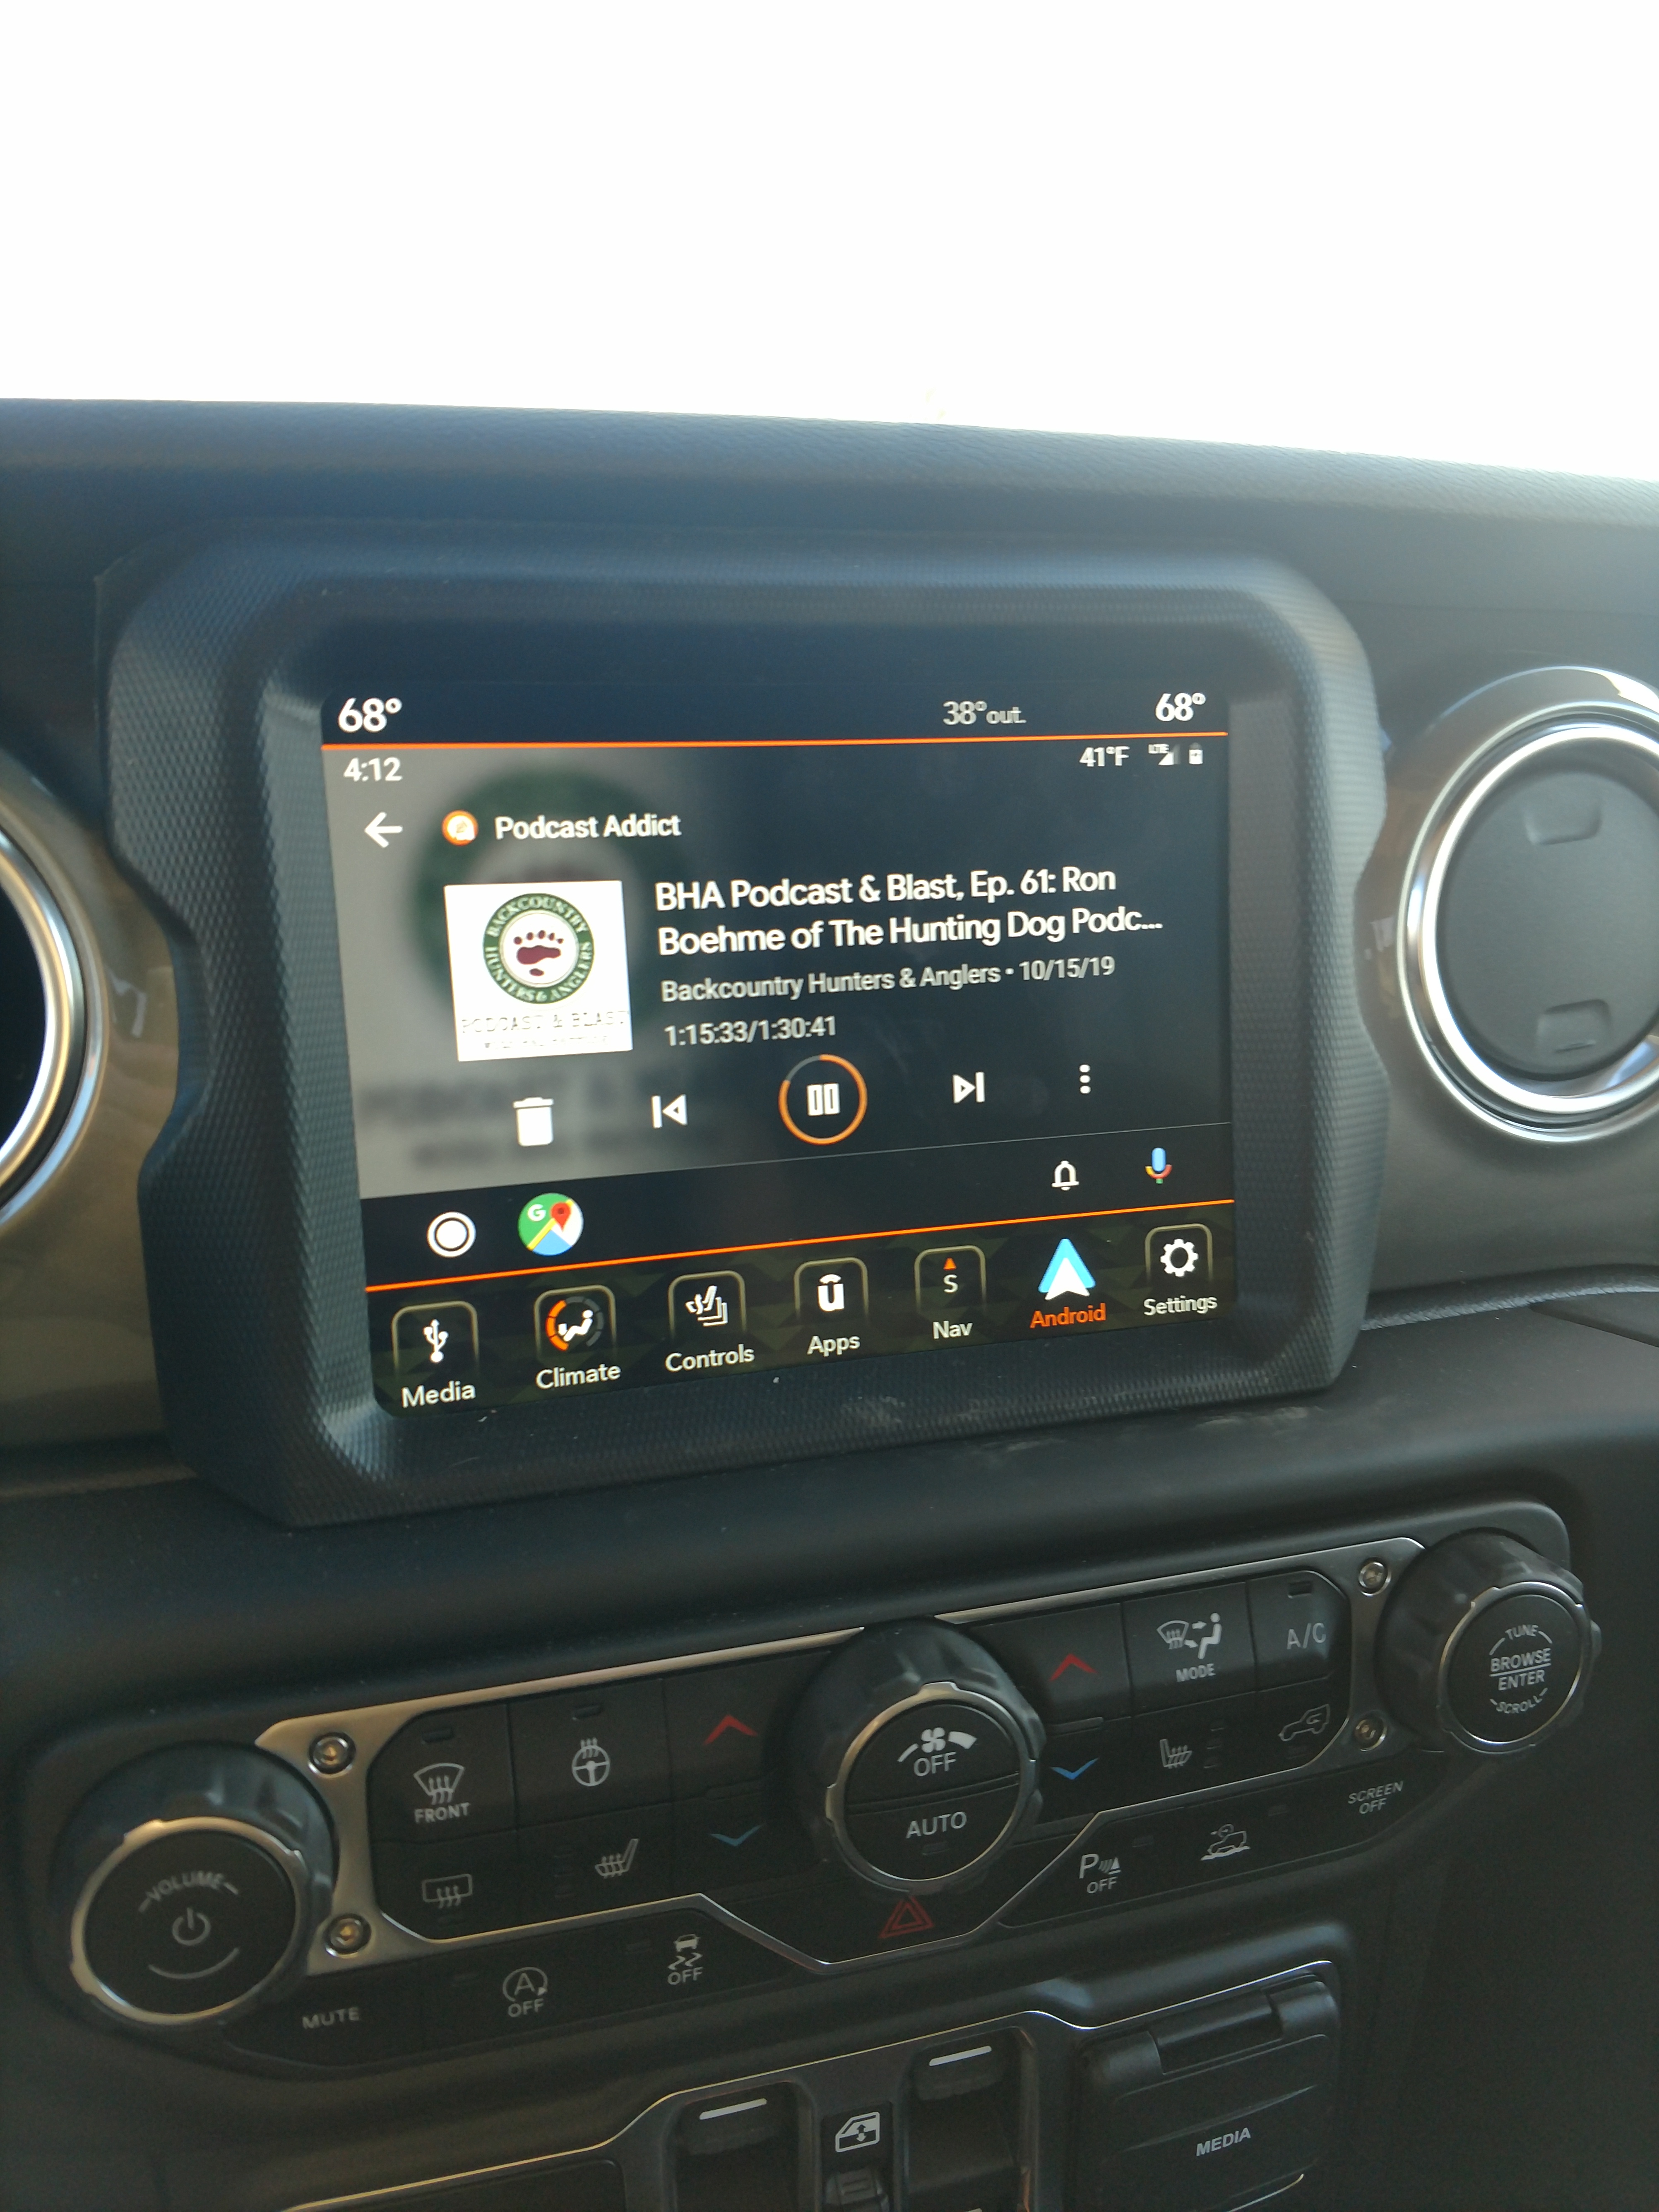 The new adventure rig has Android Auto which is pretty spiffy.